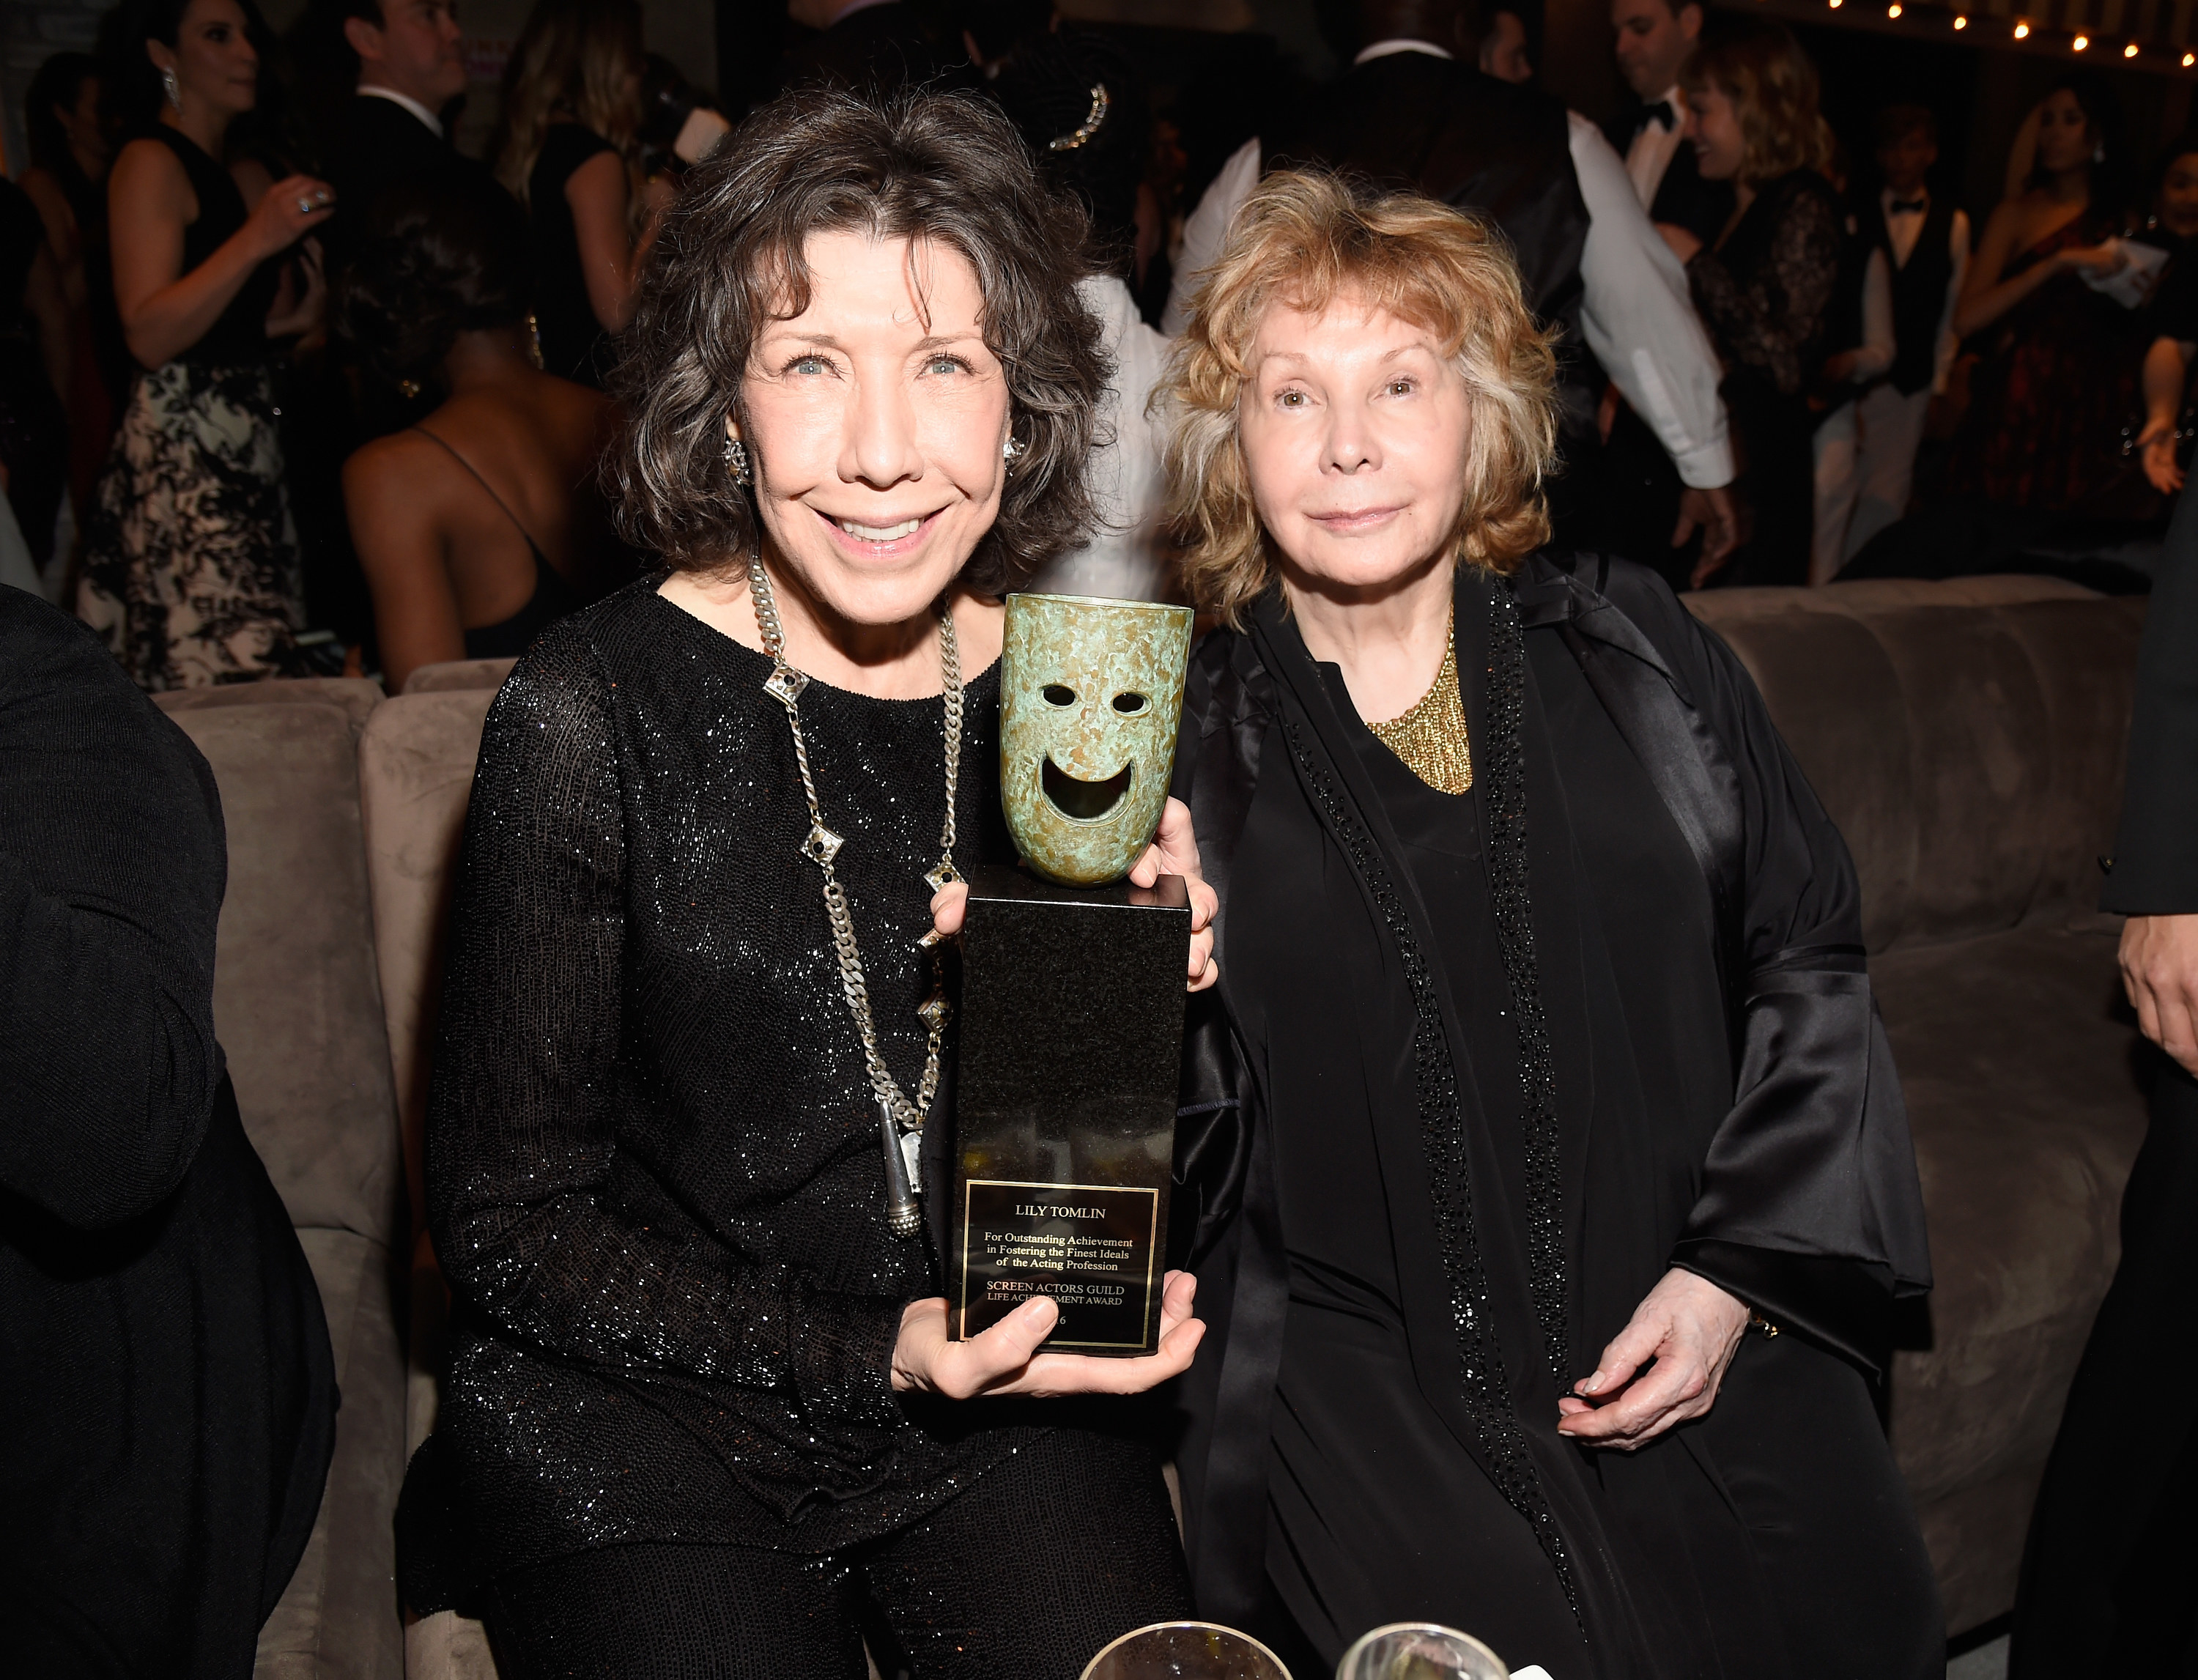 Lily Tomlin and Jane Wagner at an awards event